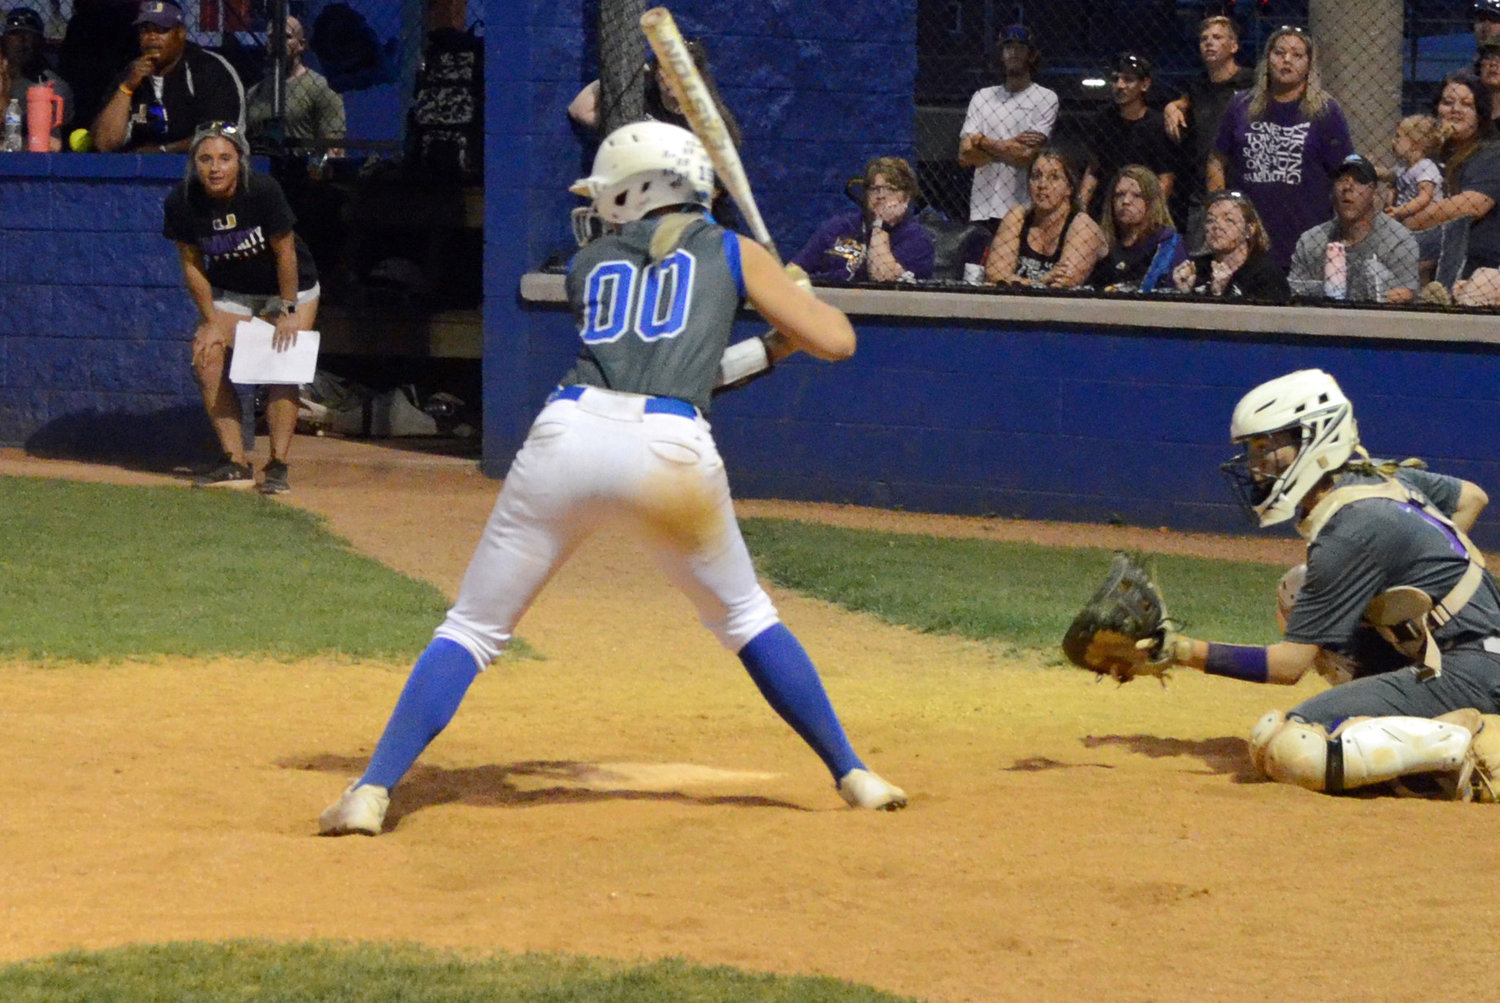 Abby Ferguson gets ready to deliver the game winning hit in the bottom of the seventh inning with two outs.